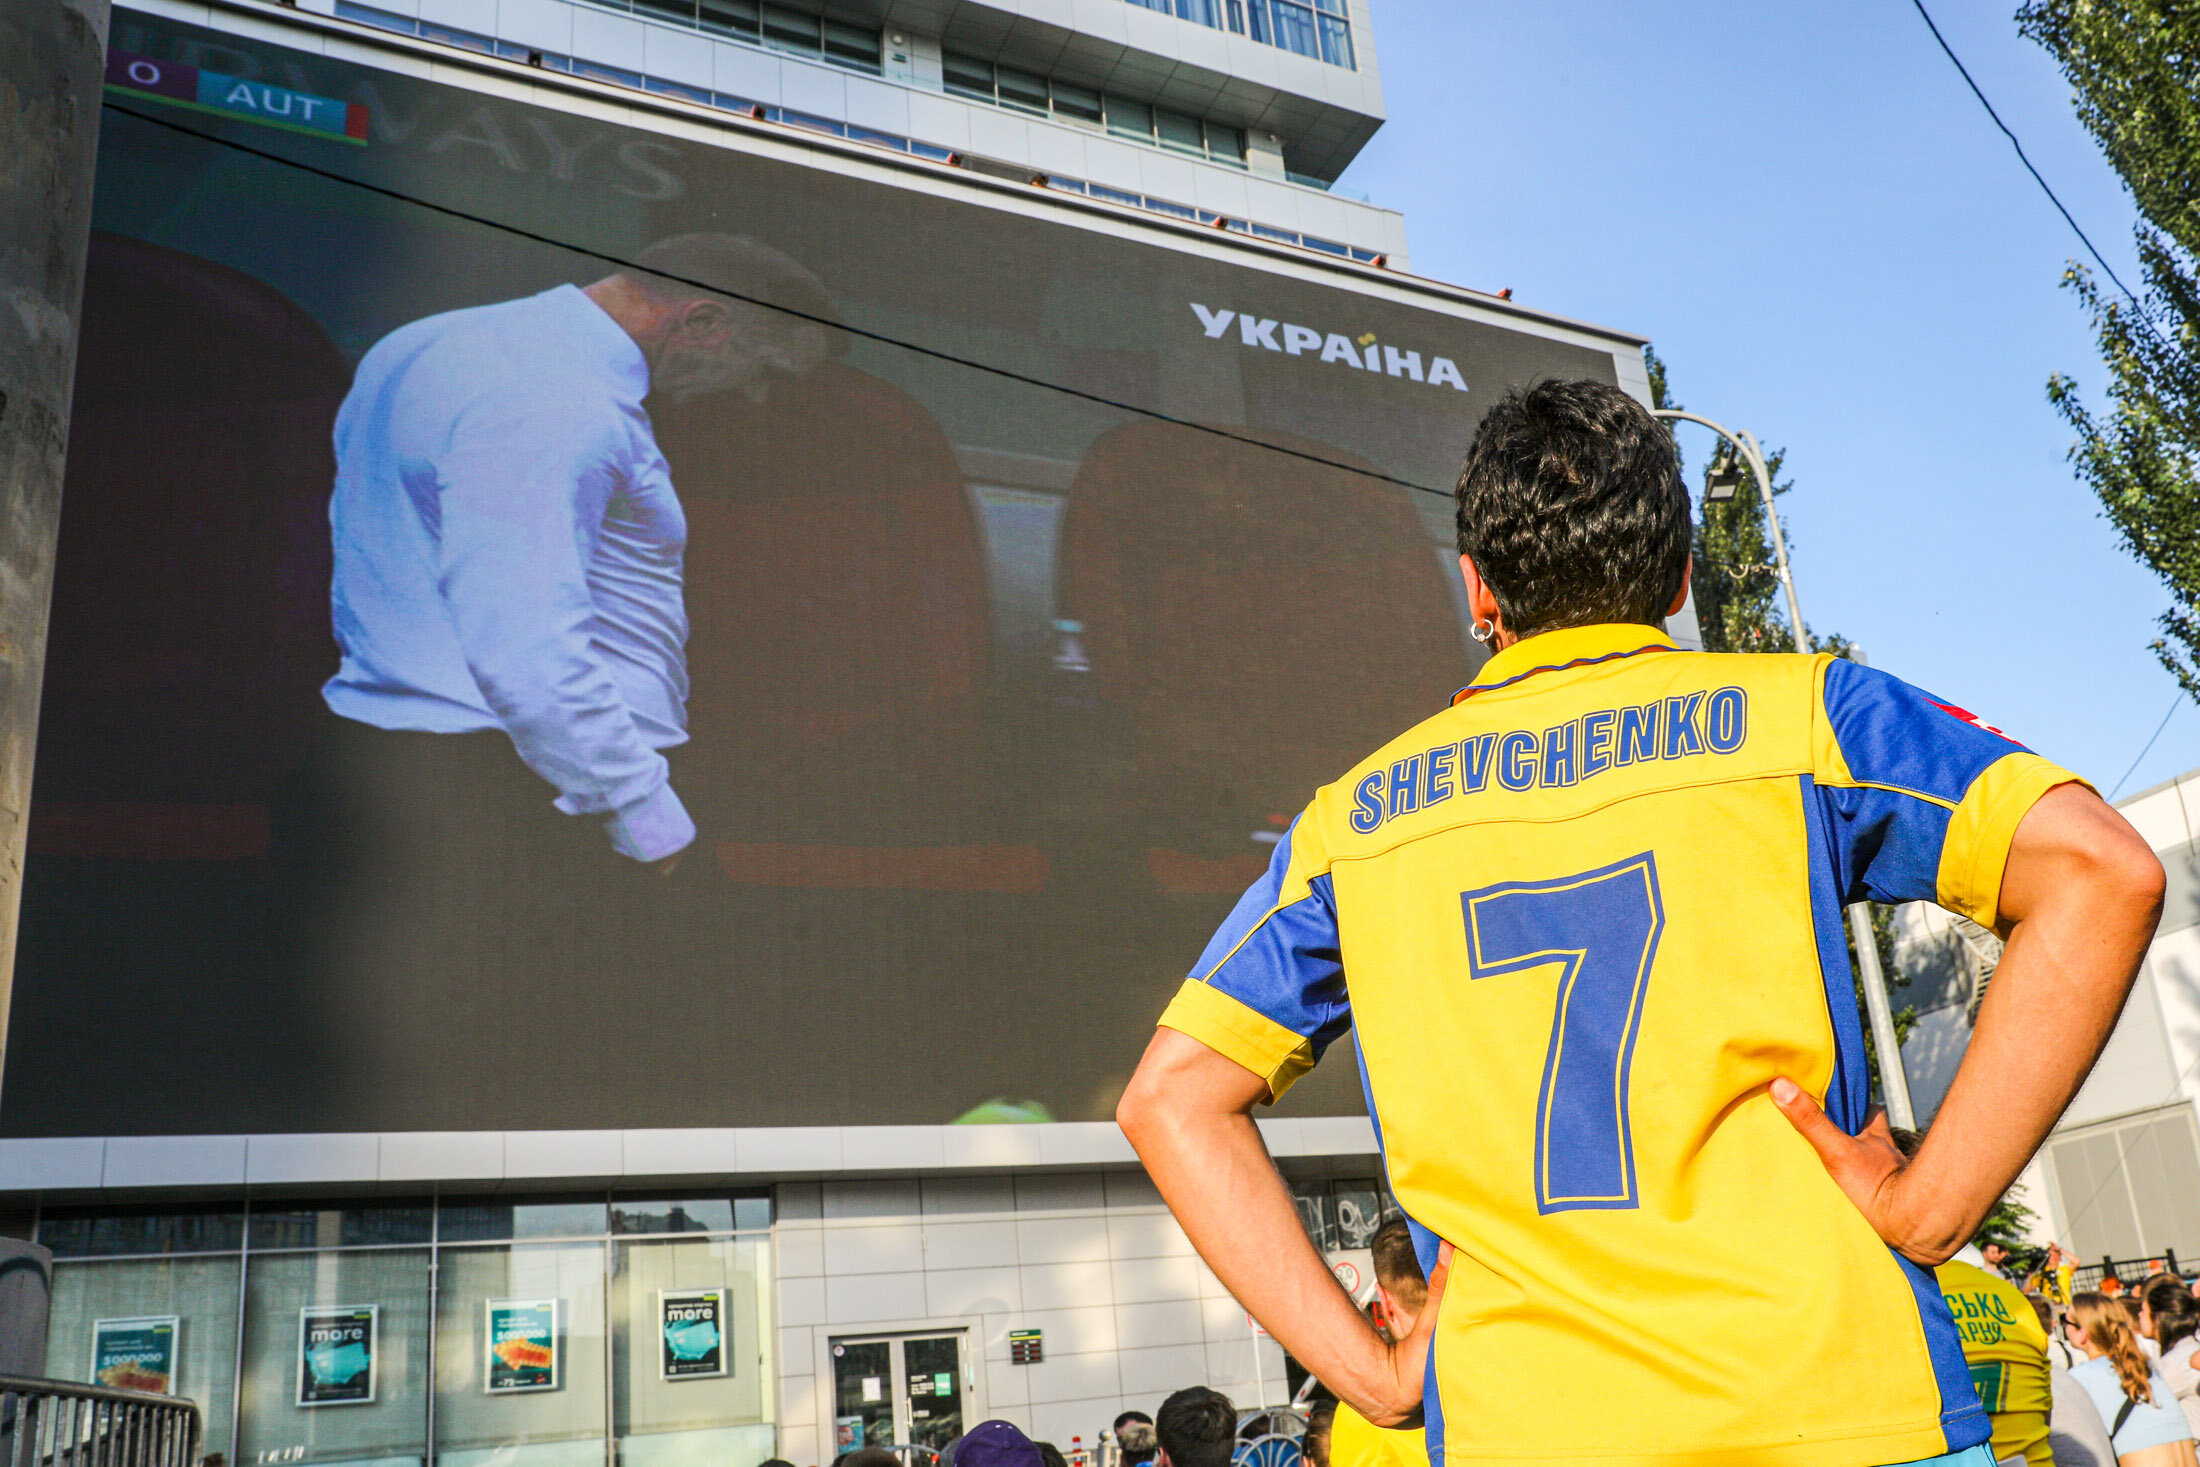 Ukrainian supporter llooks at Andrii Shevchenko, coach of the Ukrainian National team, as he watch the UEFA EURO 2020 Group C football match between Ukraine and Austria on a giant screen in the center of Kyiv on June 21, 2021.